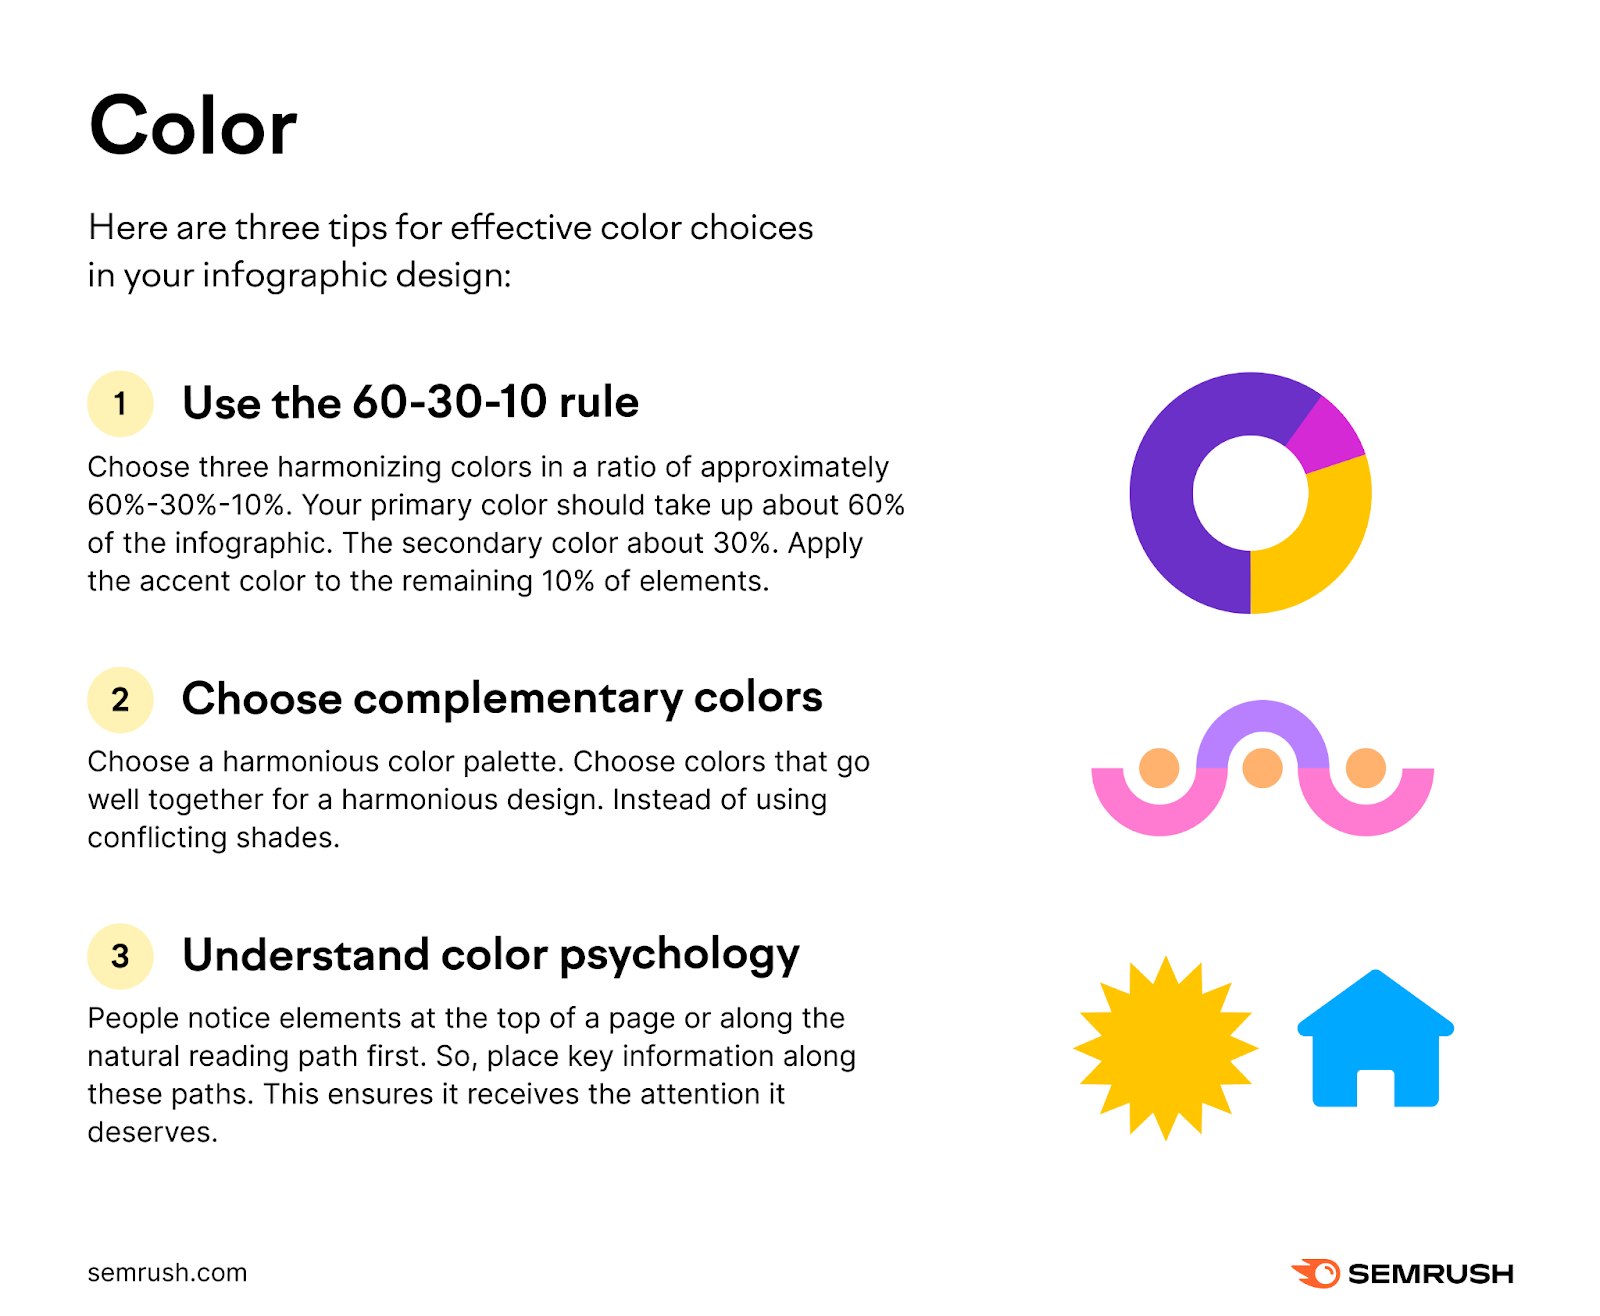 Semrush's infographic on colors, listing the three tips for effective color choices in infographic design